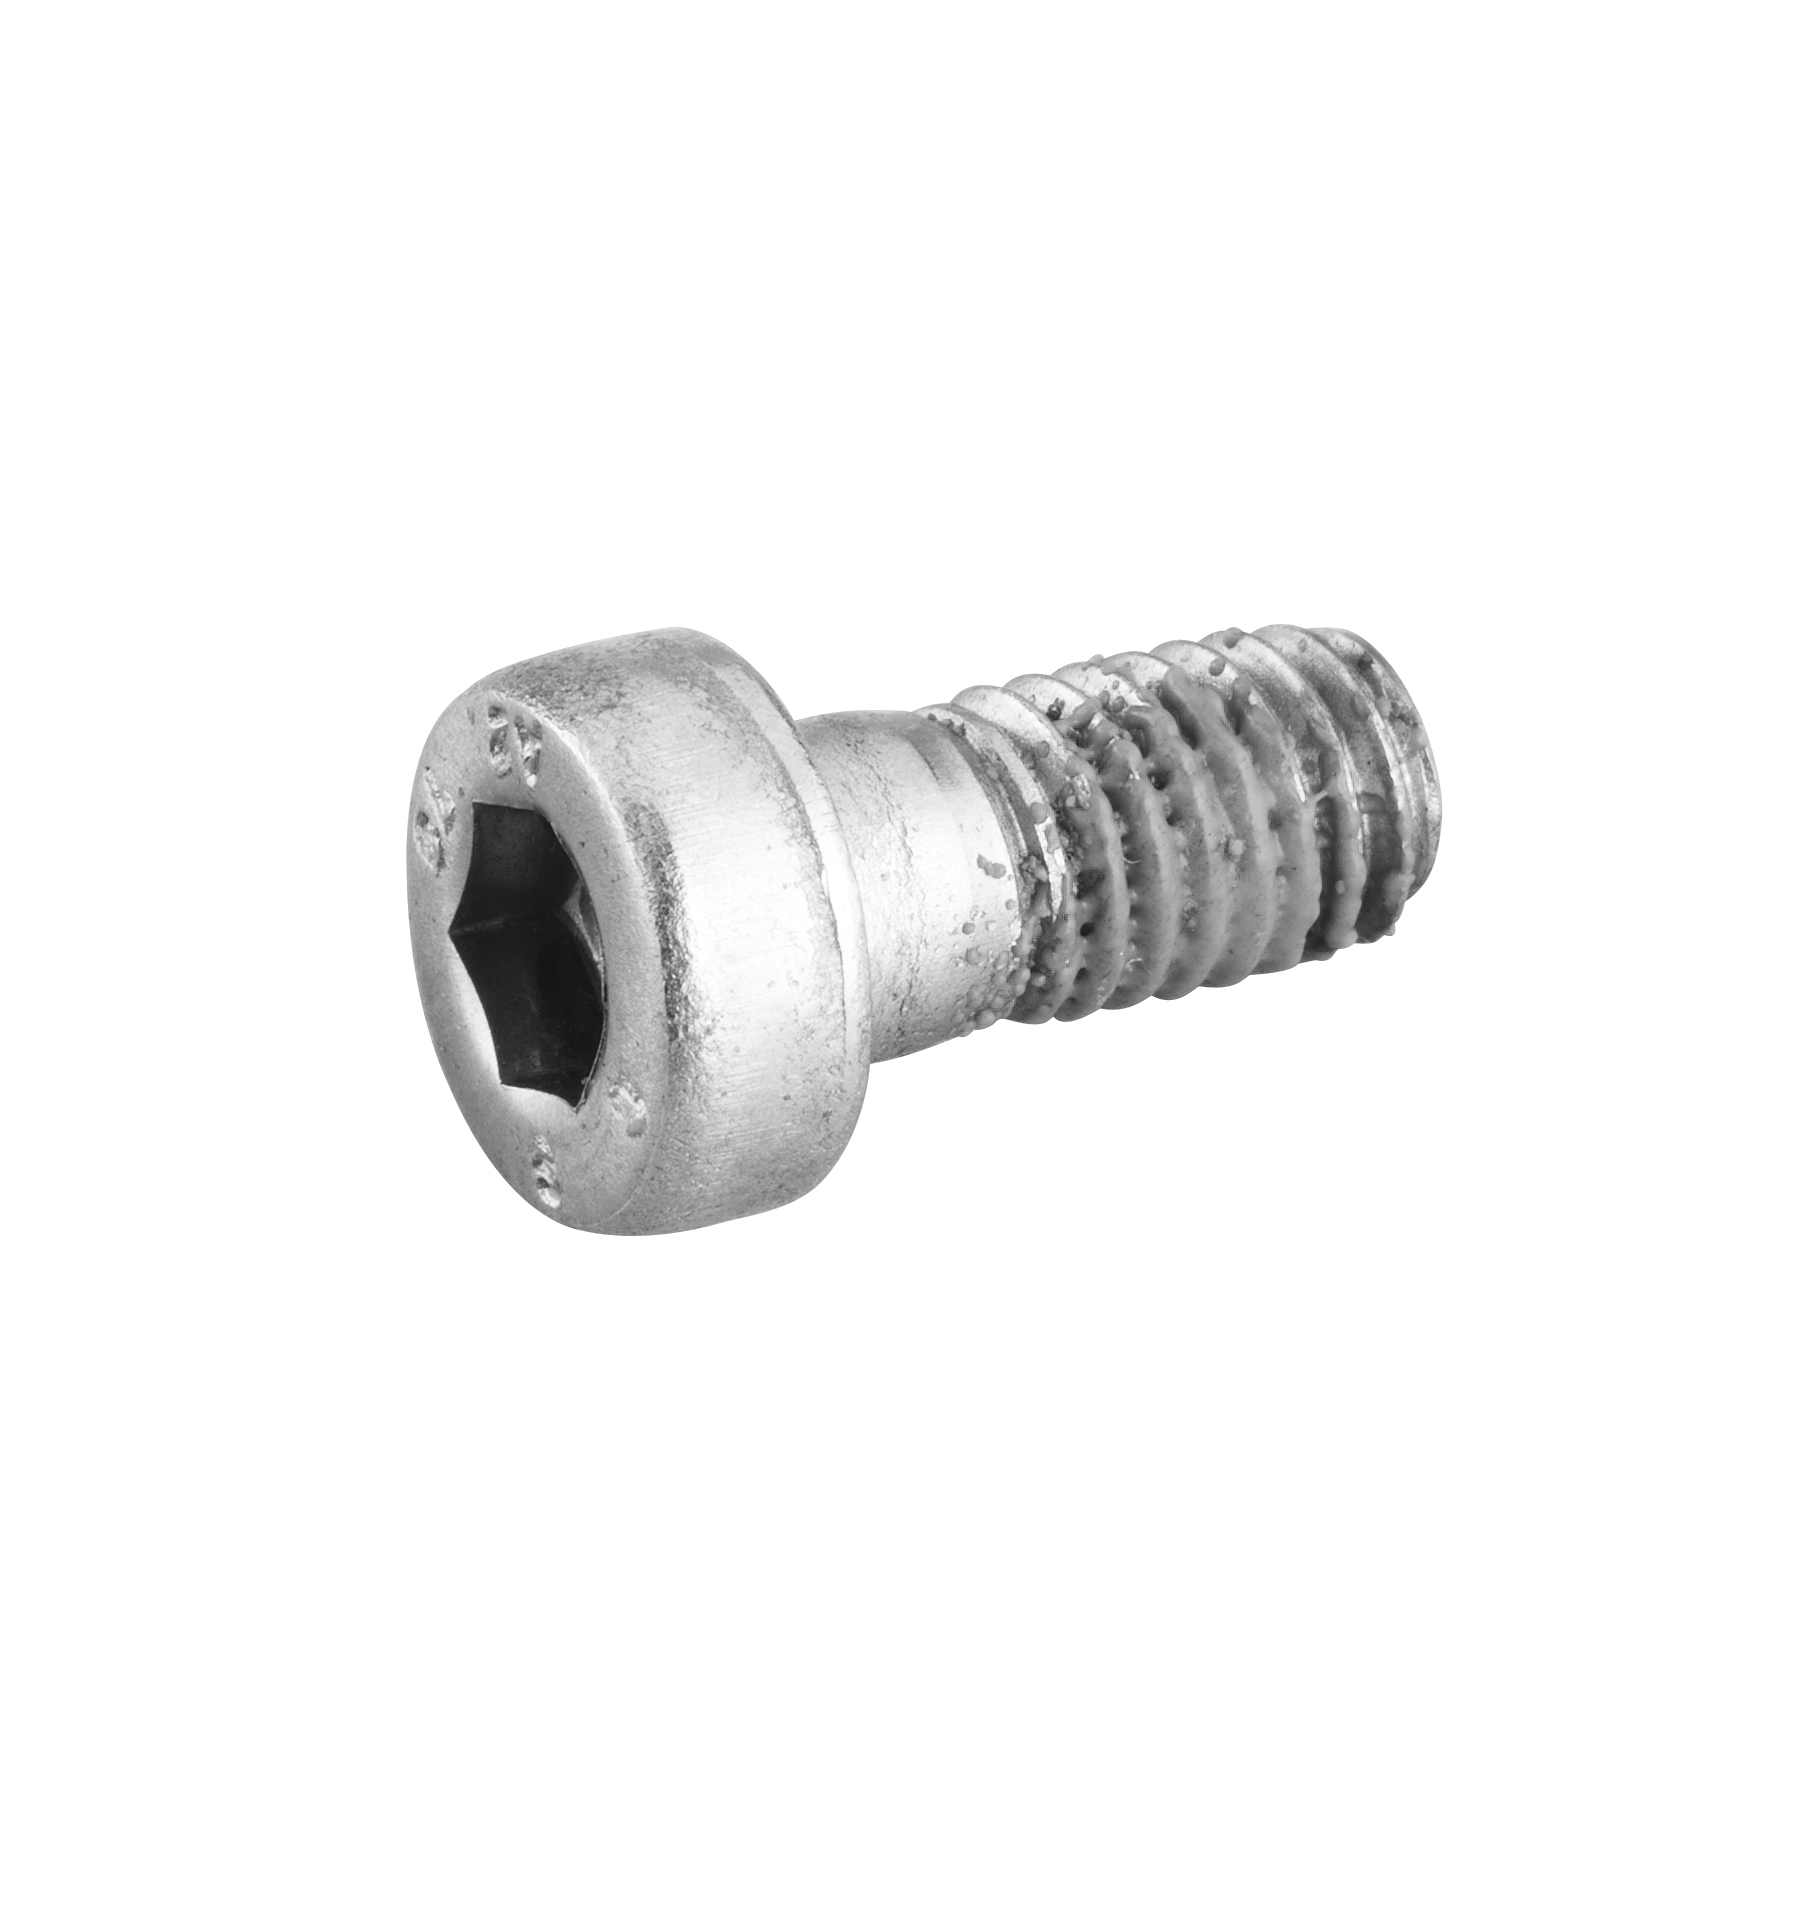 Picture of DORNBRACHT Mounting Cylinder head screw with hexagon socket M5 x 10 mm - #09303002790